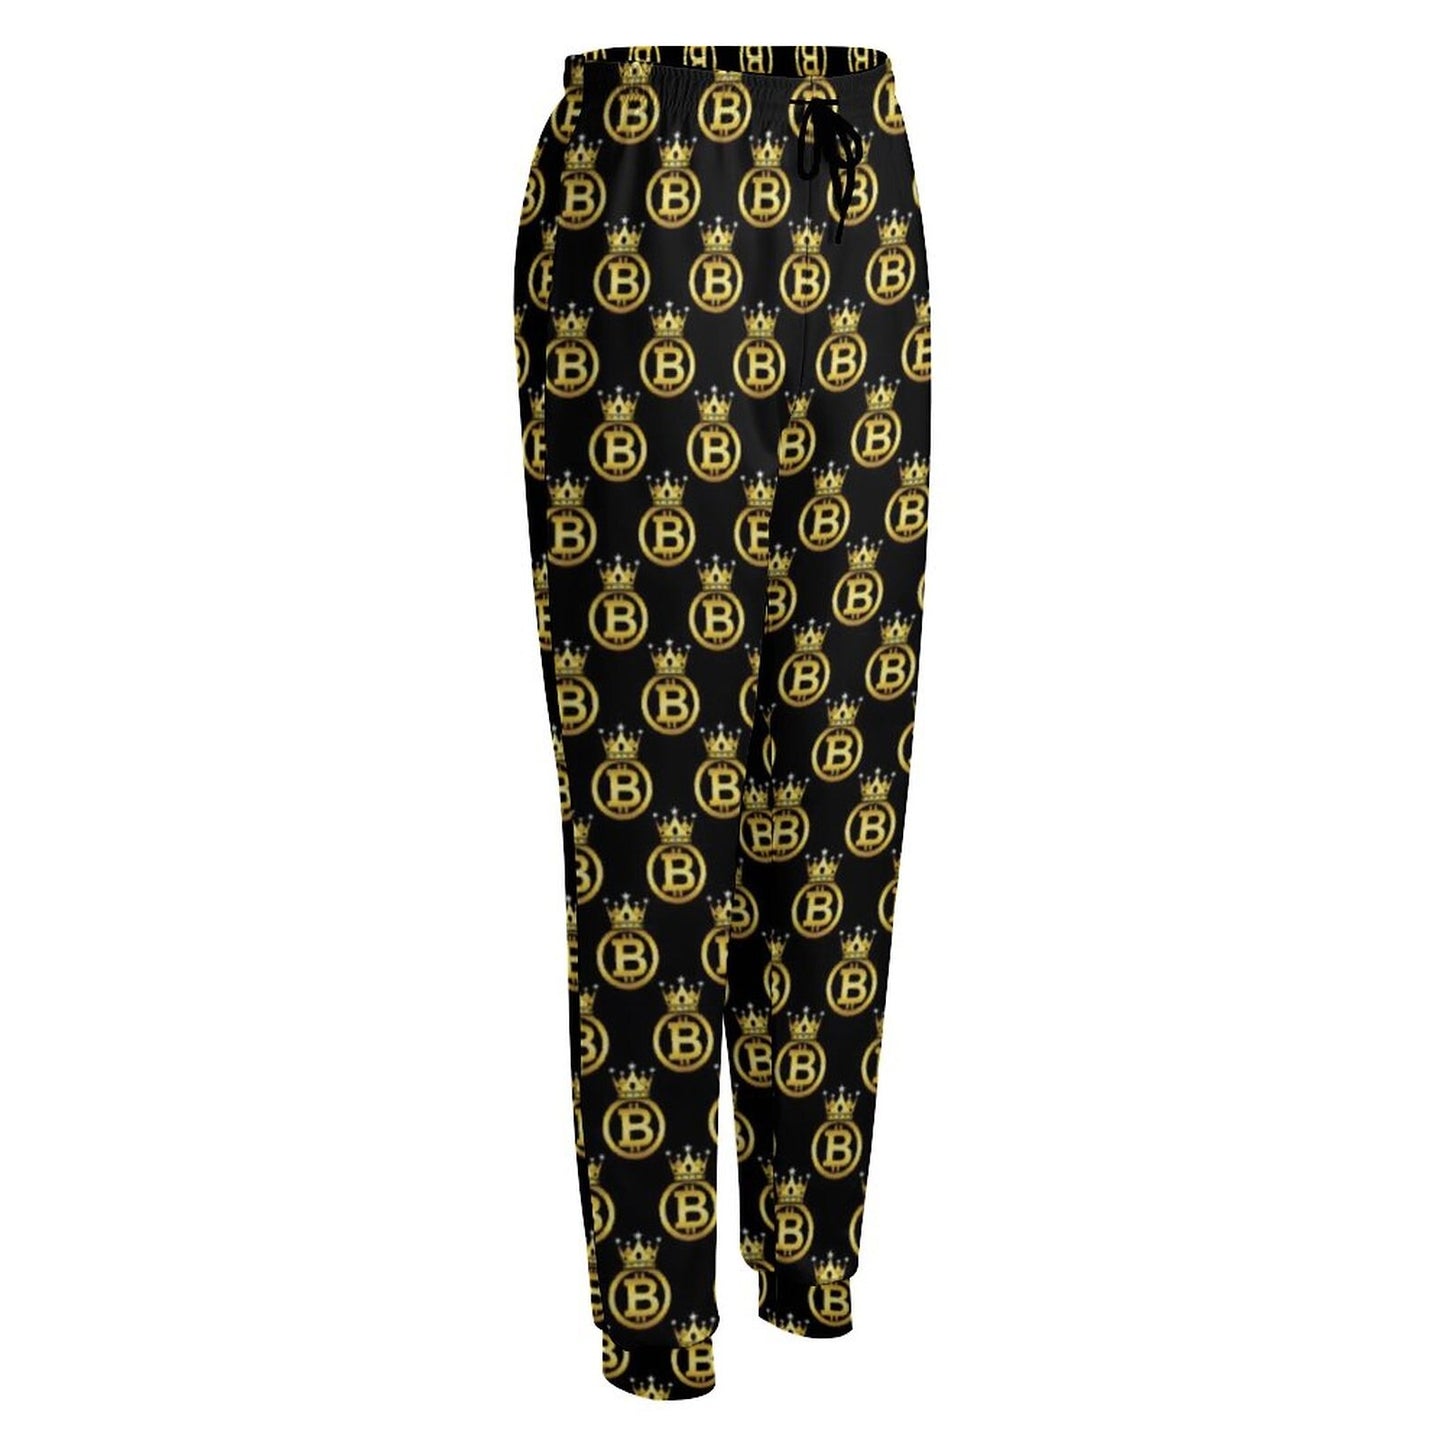 Bitcoin Pants 17 Designs Spring Cryptocurrency-Themed Home Sweatpants